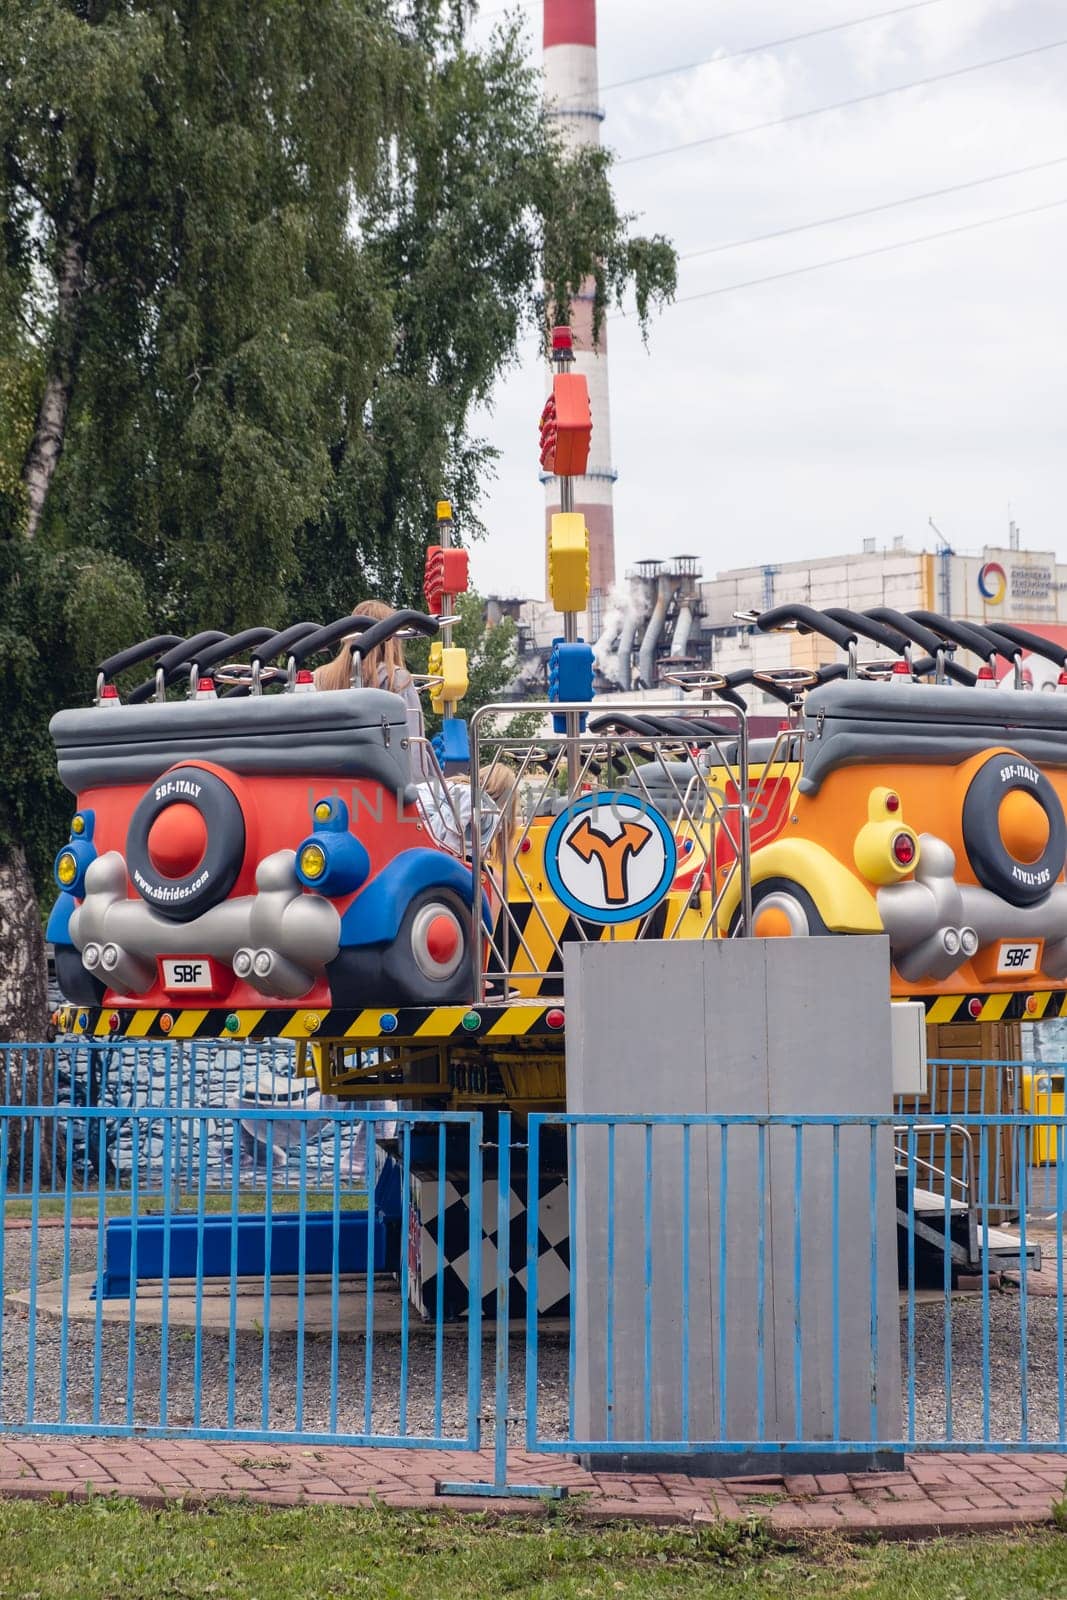 21.07.2023, Kemerovo, Russia. An amusement park with carousels for people to relax. Dangerous carousels in the city amusement park.